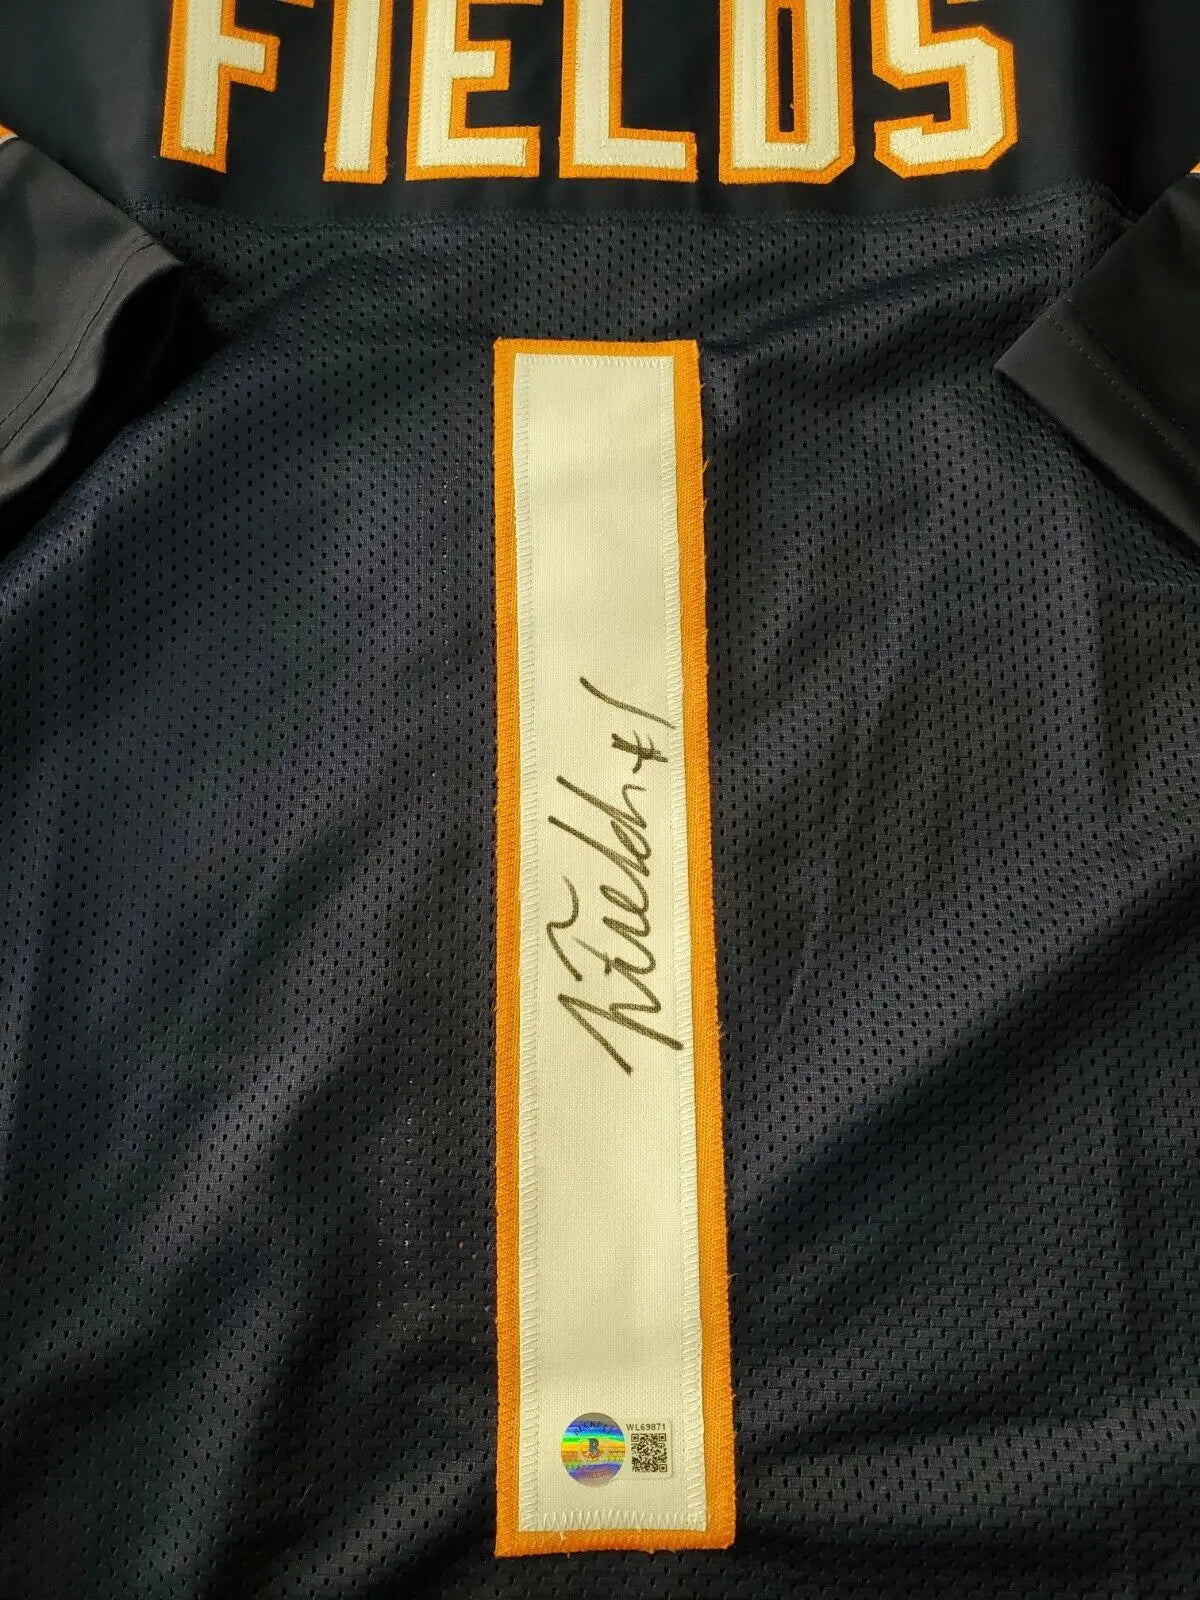 MVP Authentics Chicago Bears Justin Fields Autographed Signed Jersey Beckett Coa 252 sports jersey framing , jersey framing